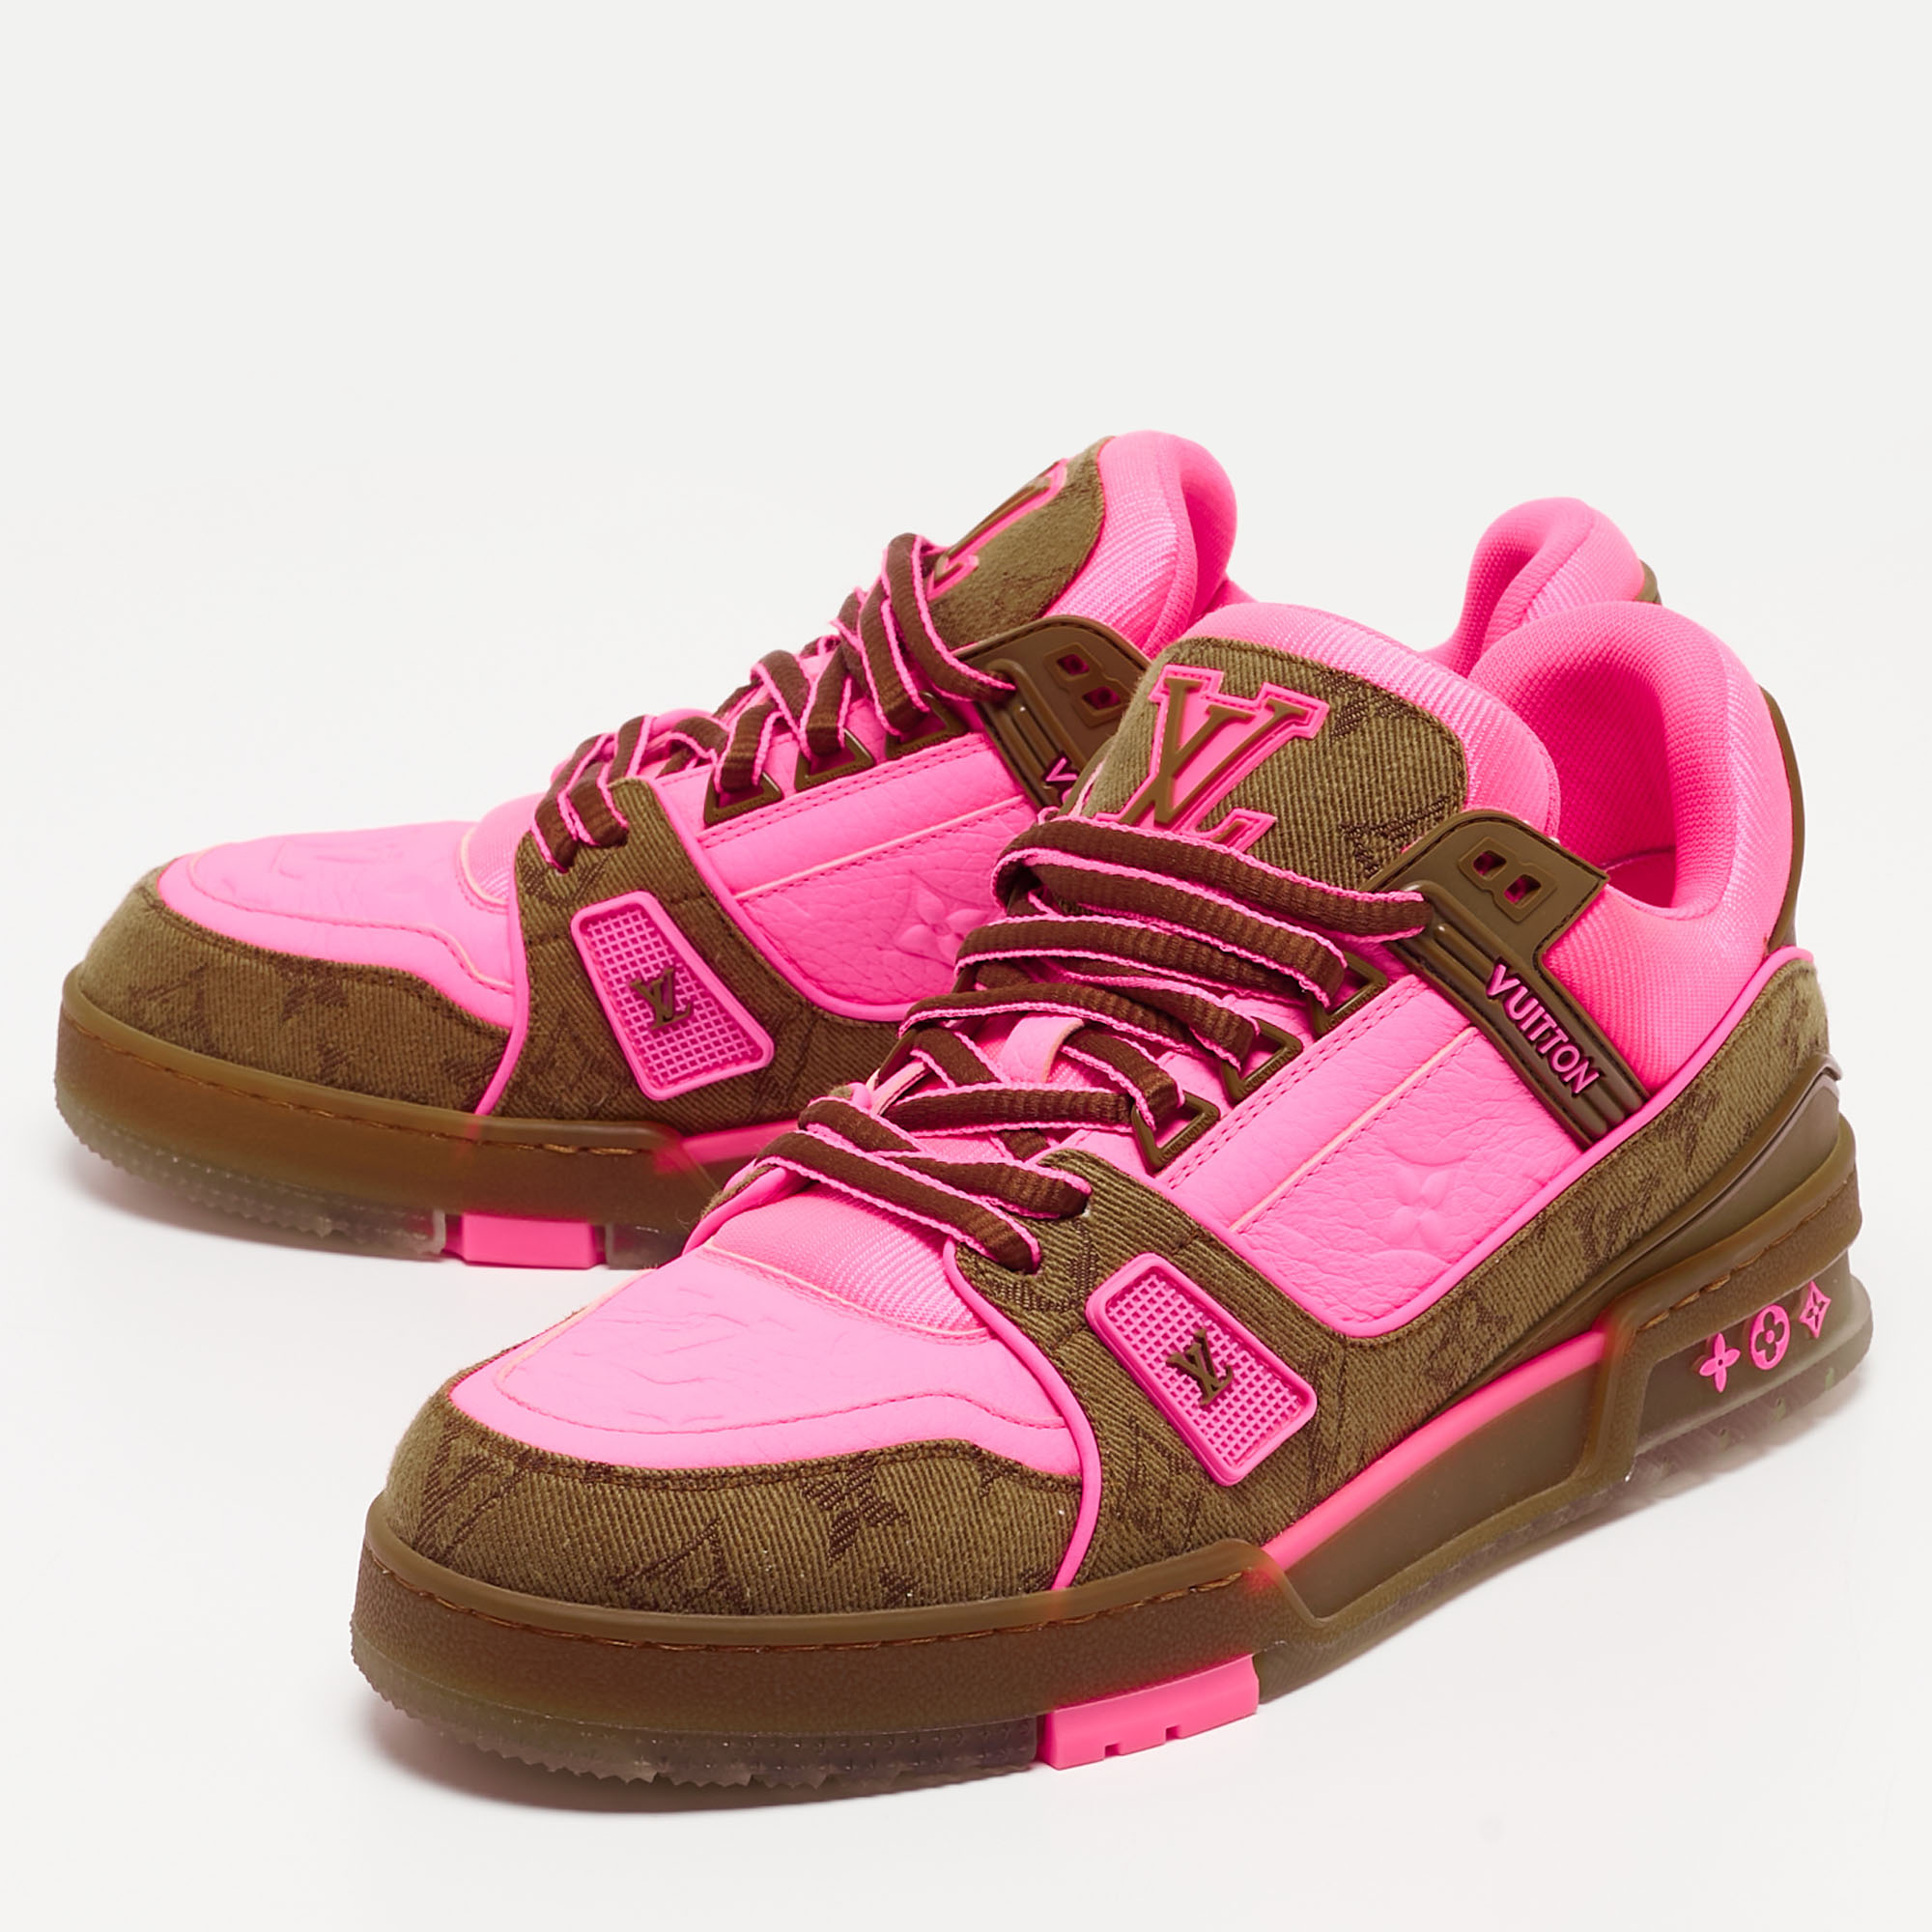 

Louis Vuitton Neon Pink/Brown Monogram Leather and Canvas LV Trainer Sneakers Size